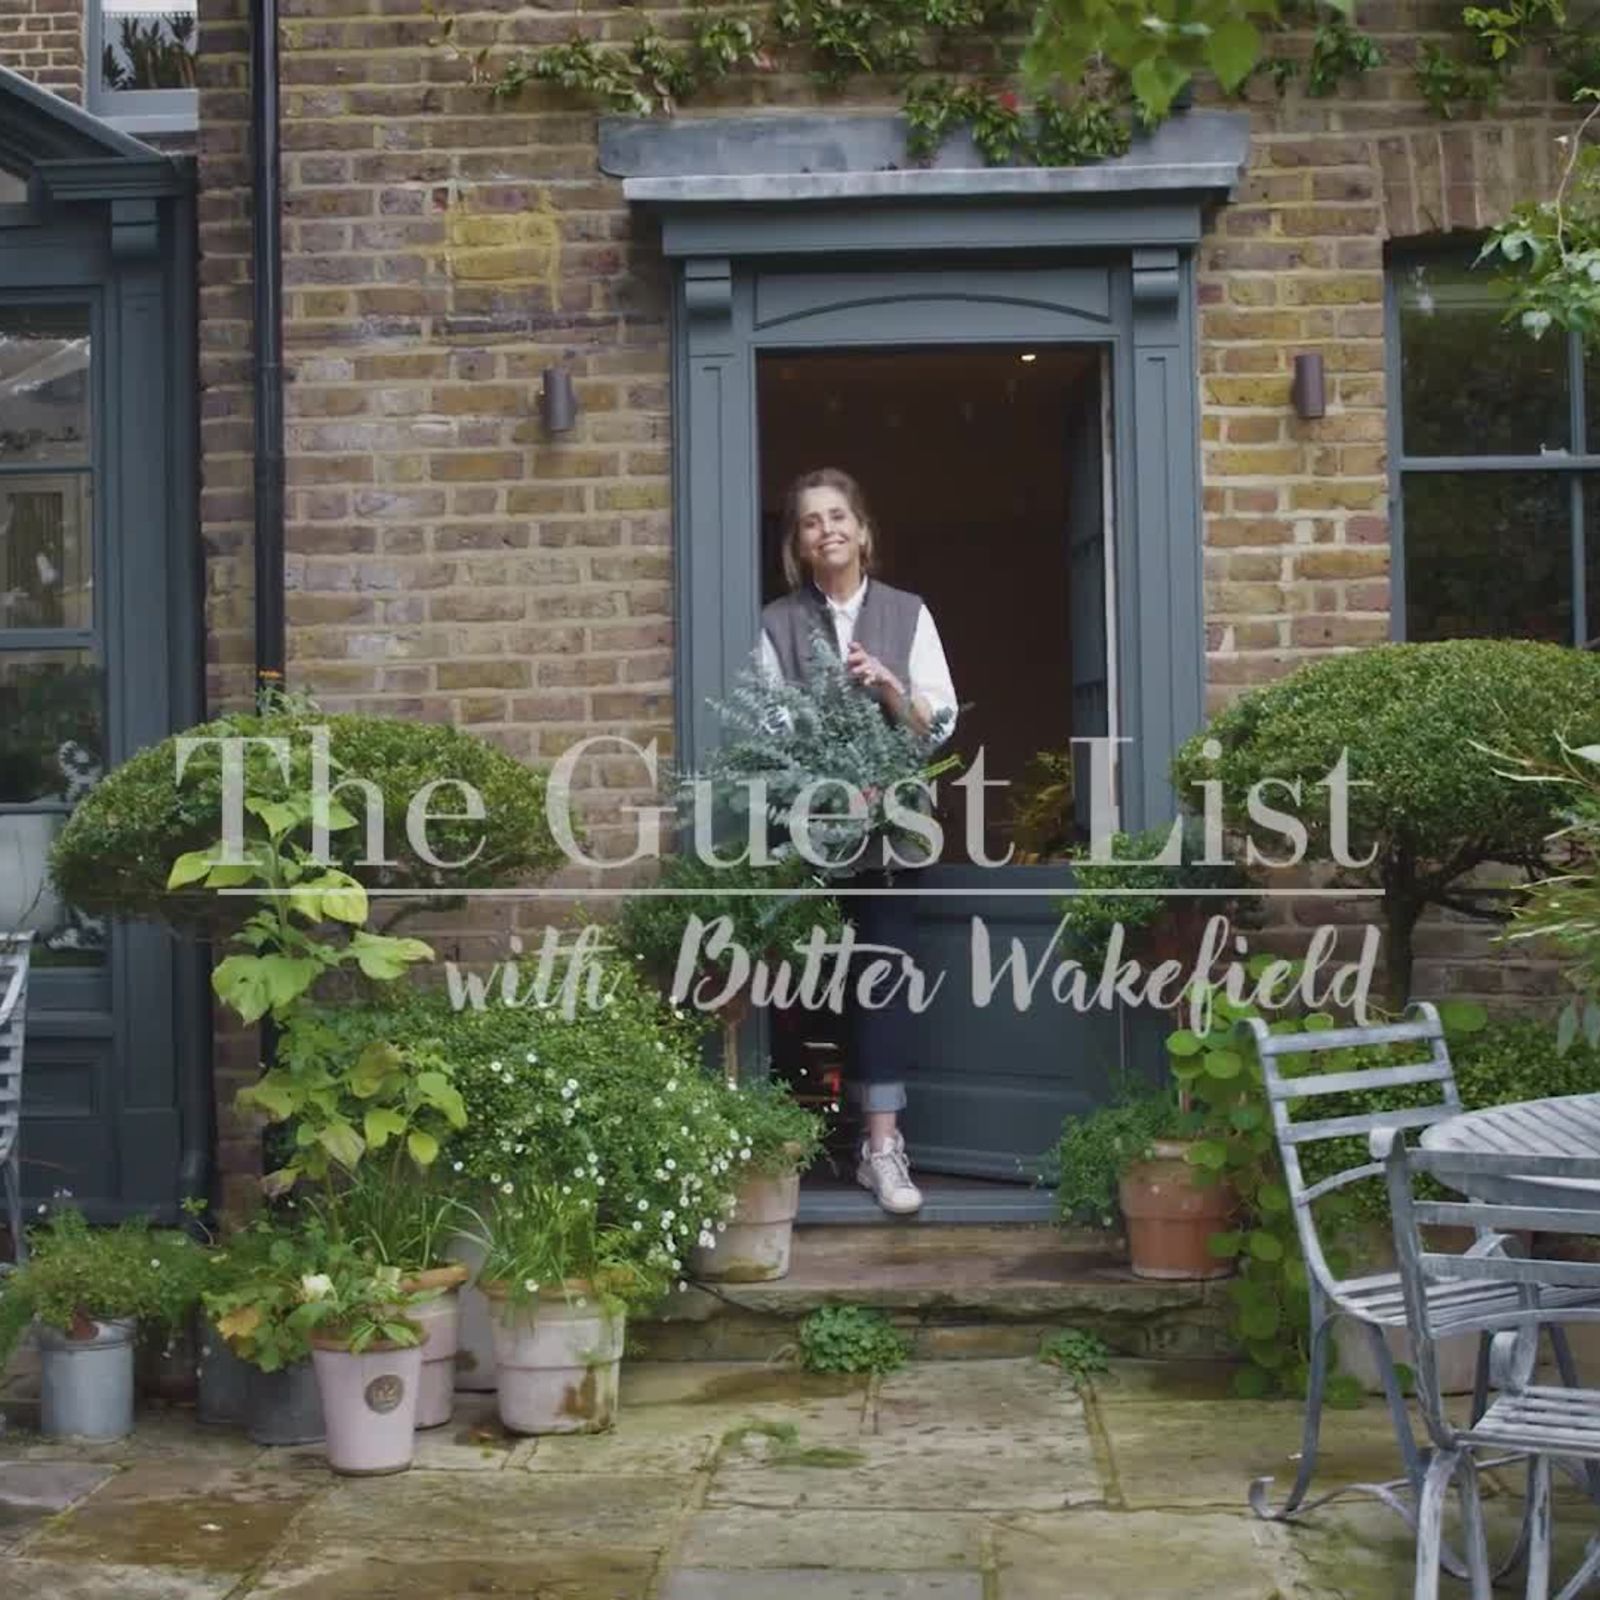 A master class in Christmas wreath making by Butter Wakefield | The Guest List